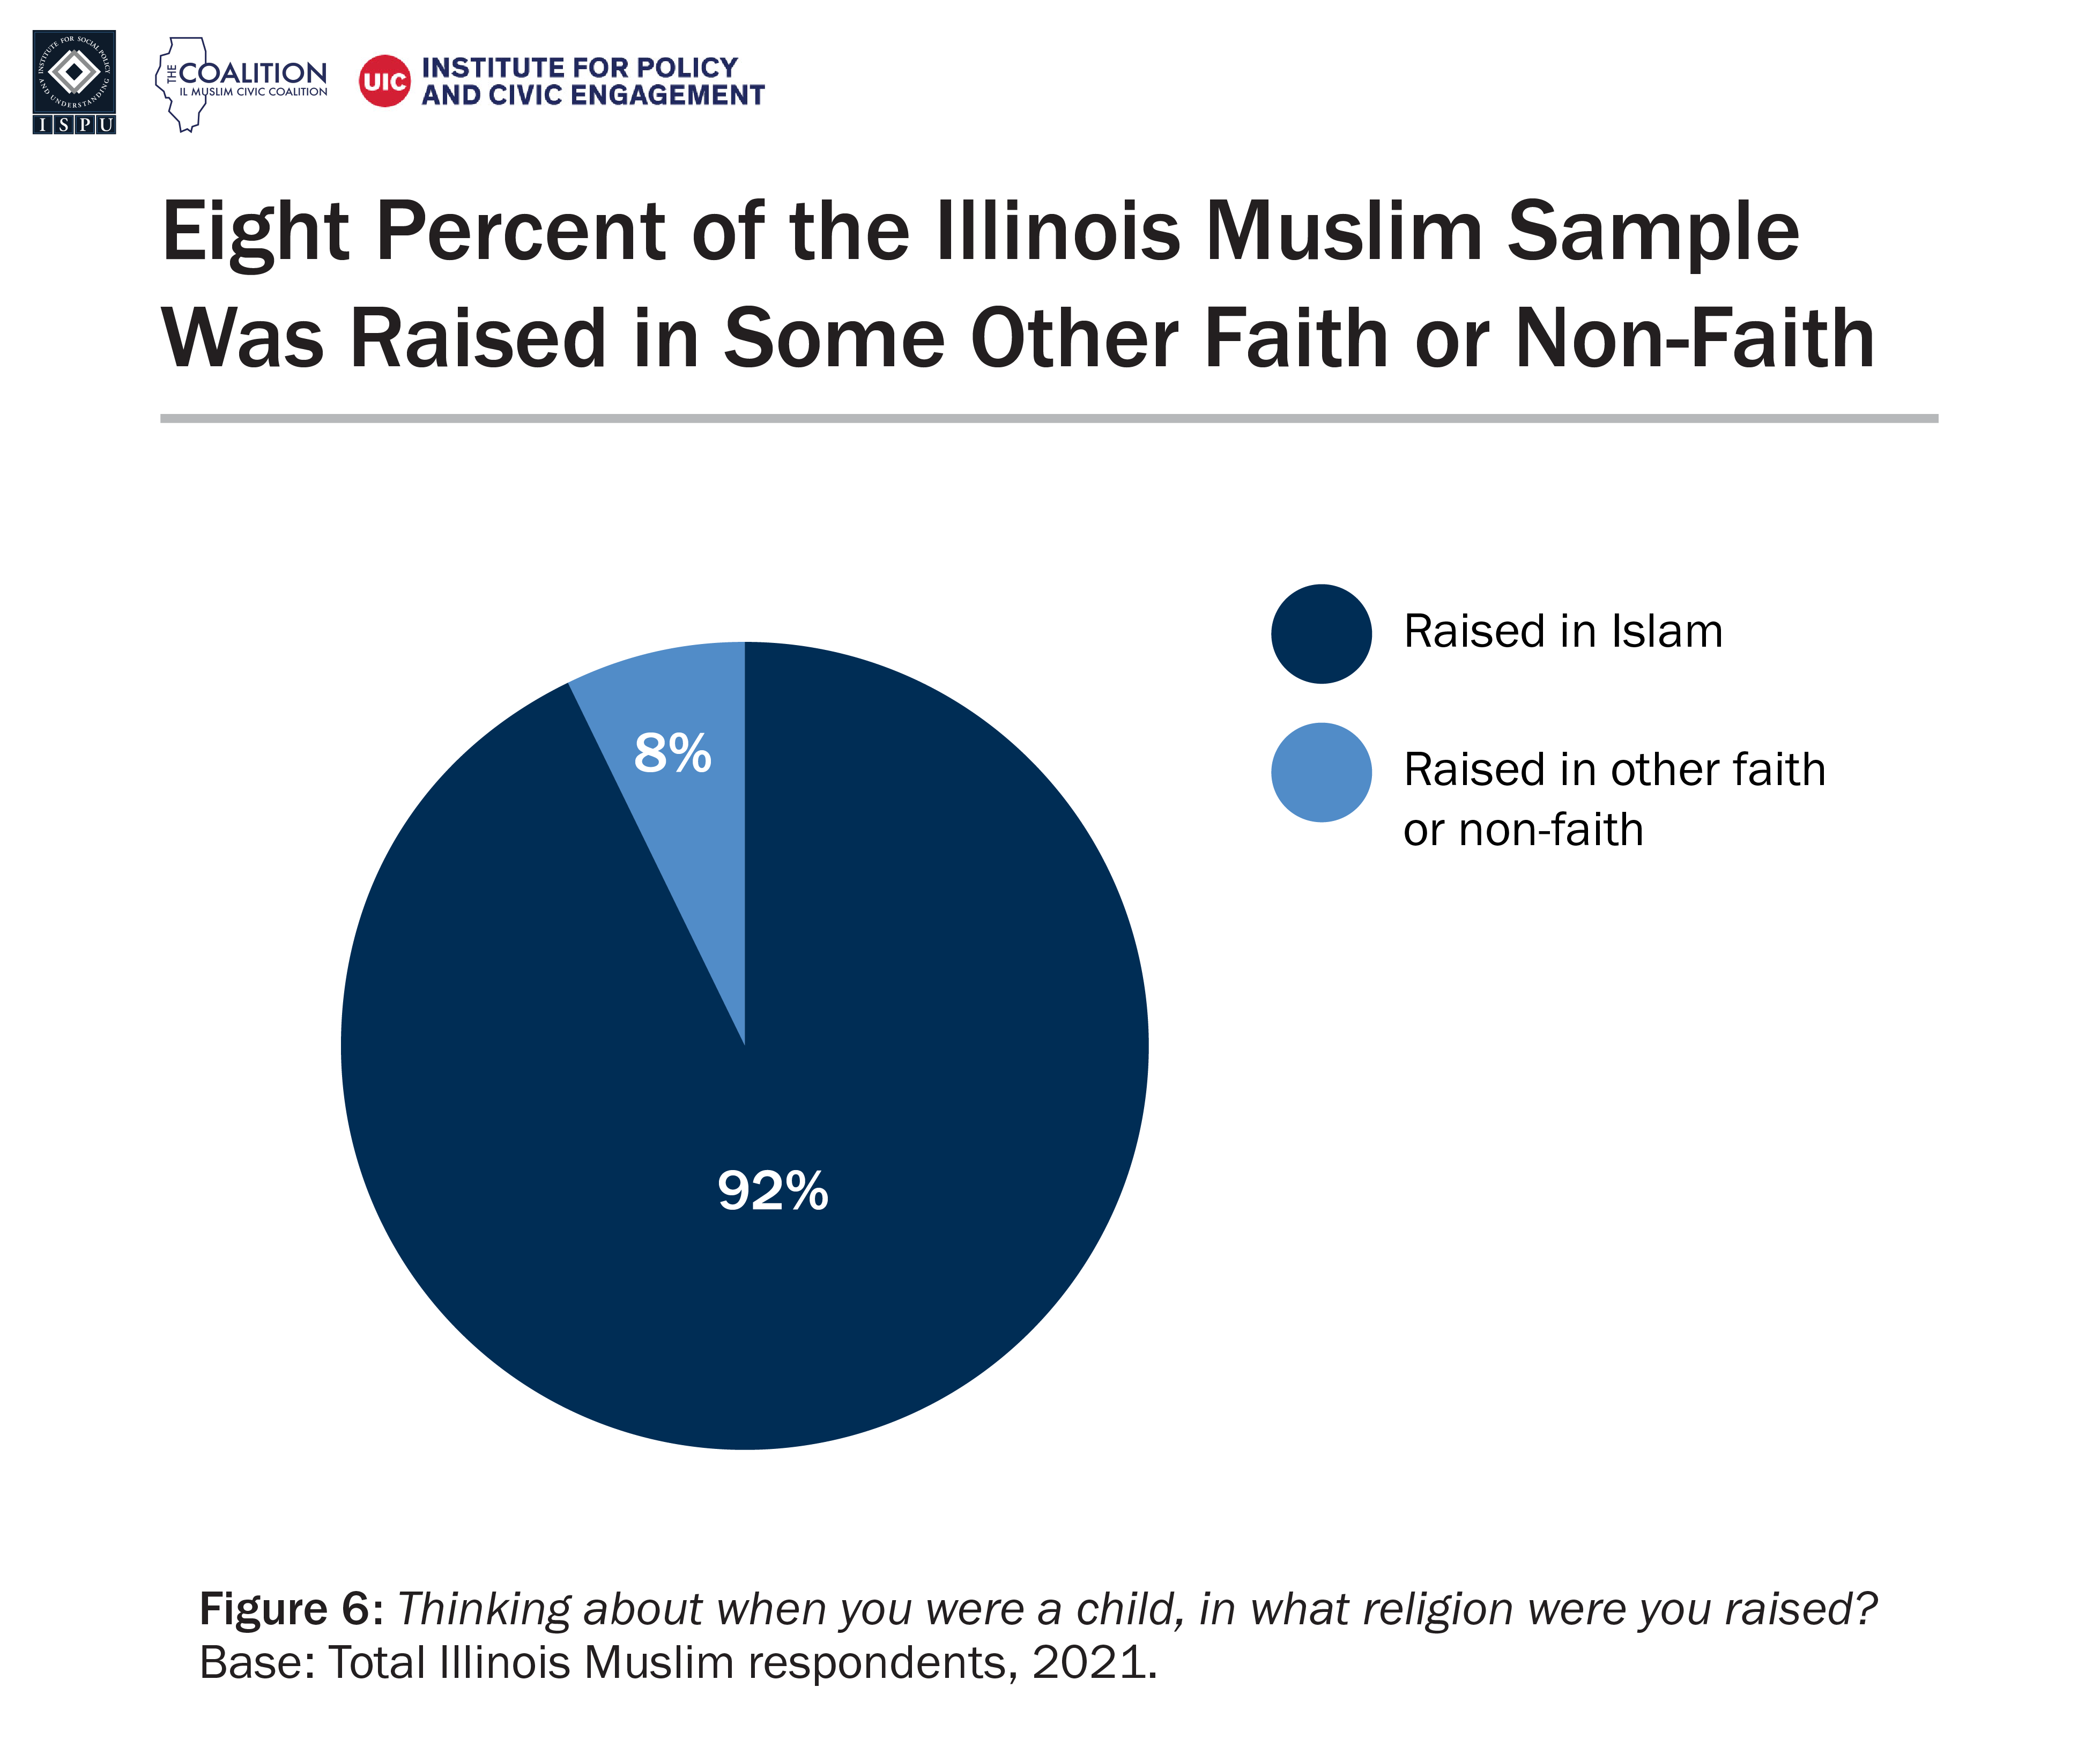 A pie chart showing the percent of Illinois Muslims sample that was raised Muslim versus raised in some other faith or non-faith